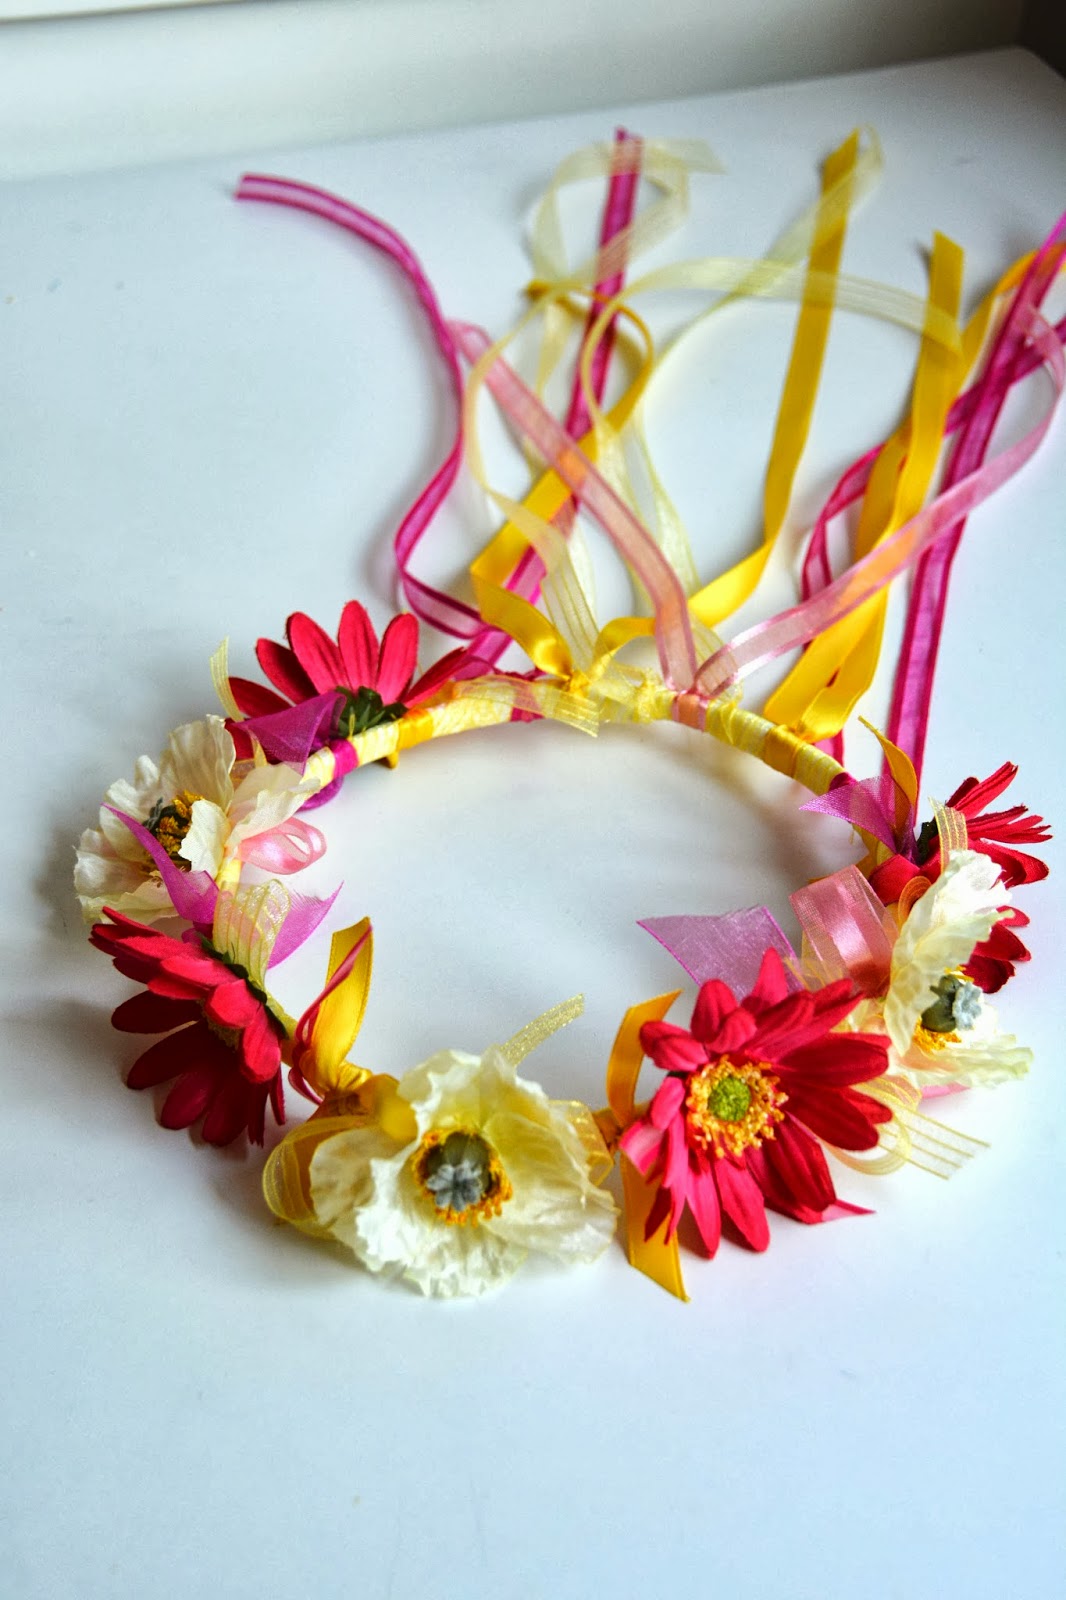 Aesthetic Nest: Craft: Ribbon and Flower Crowns (Tutorial)